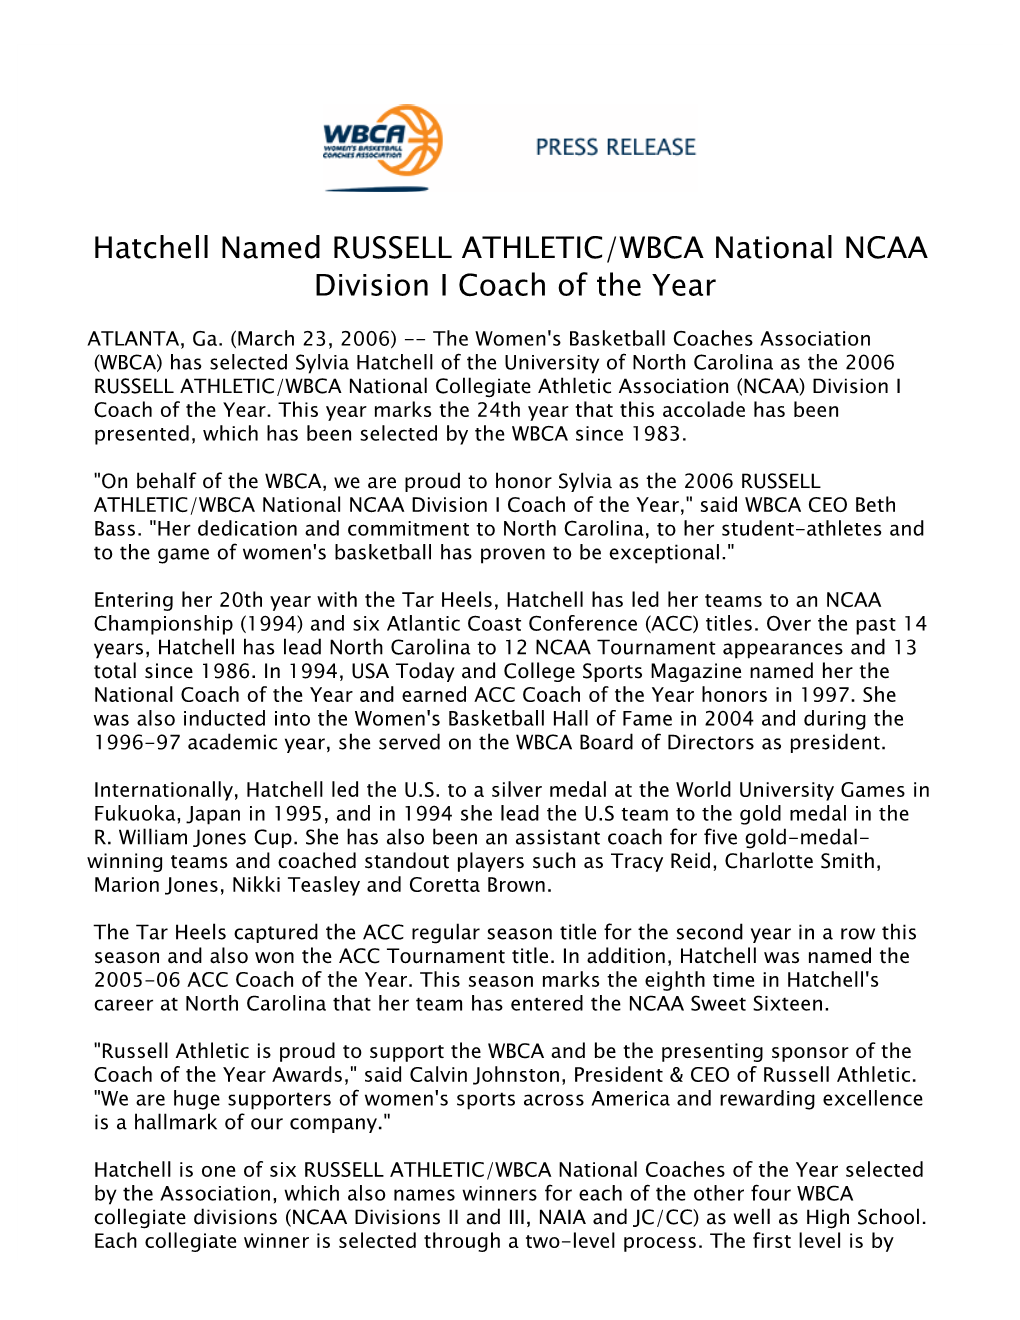 Hatchell Named RUSSELL ATHLETIC/WBCA National NCAA Division I Coach of the Year